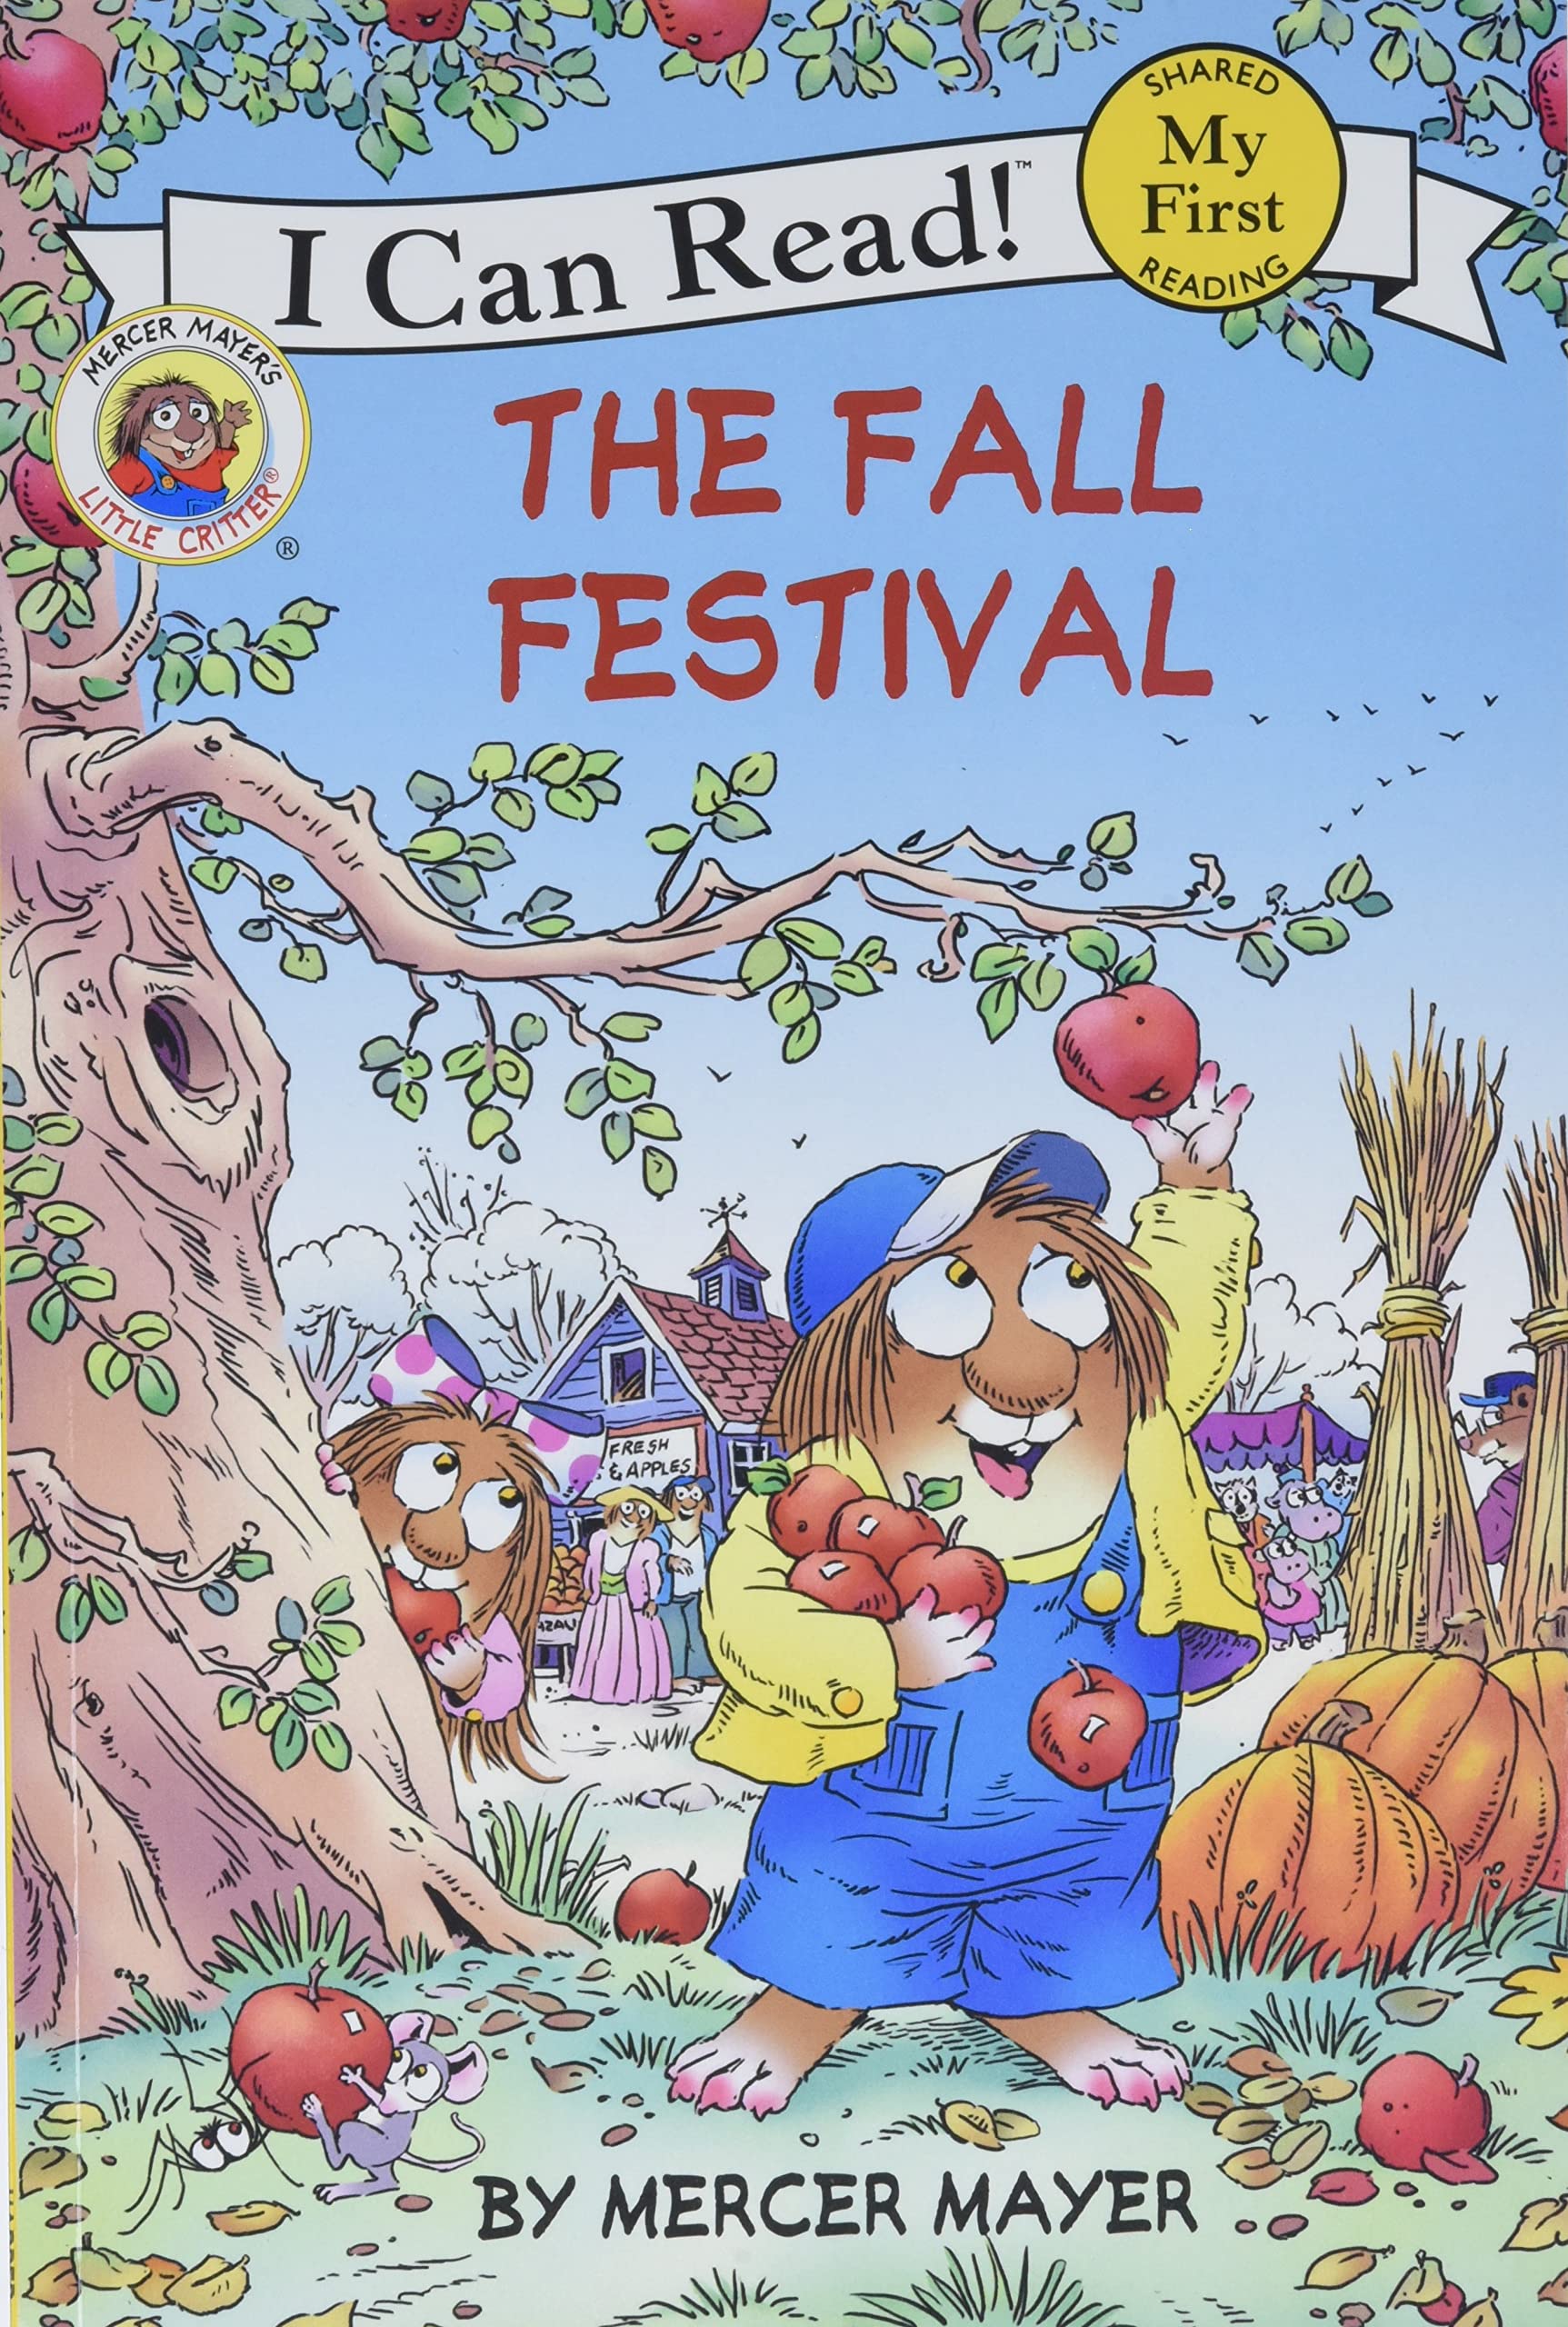 speech and language teaching concepts for Little Critter: The Fall Festival in speech therapy​ ​